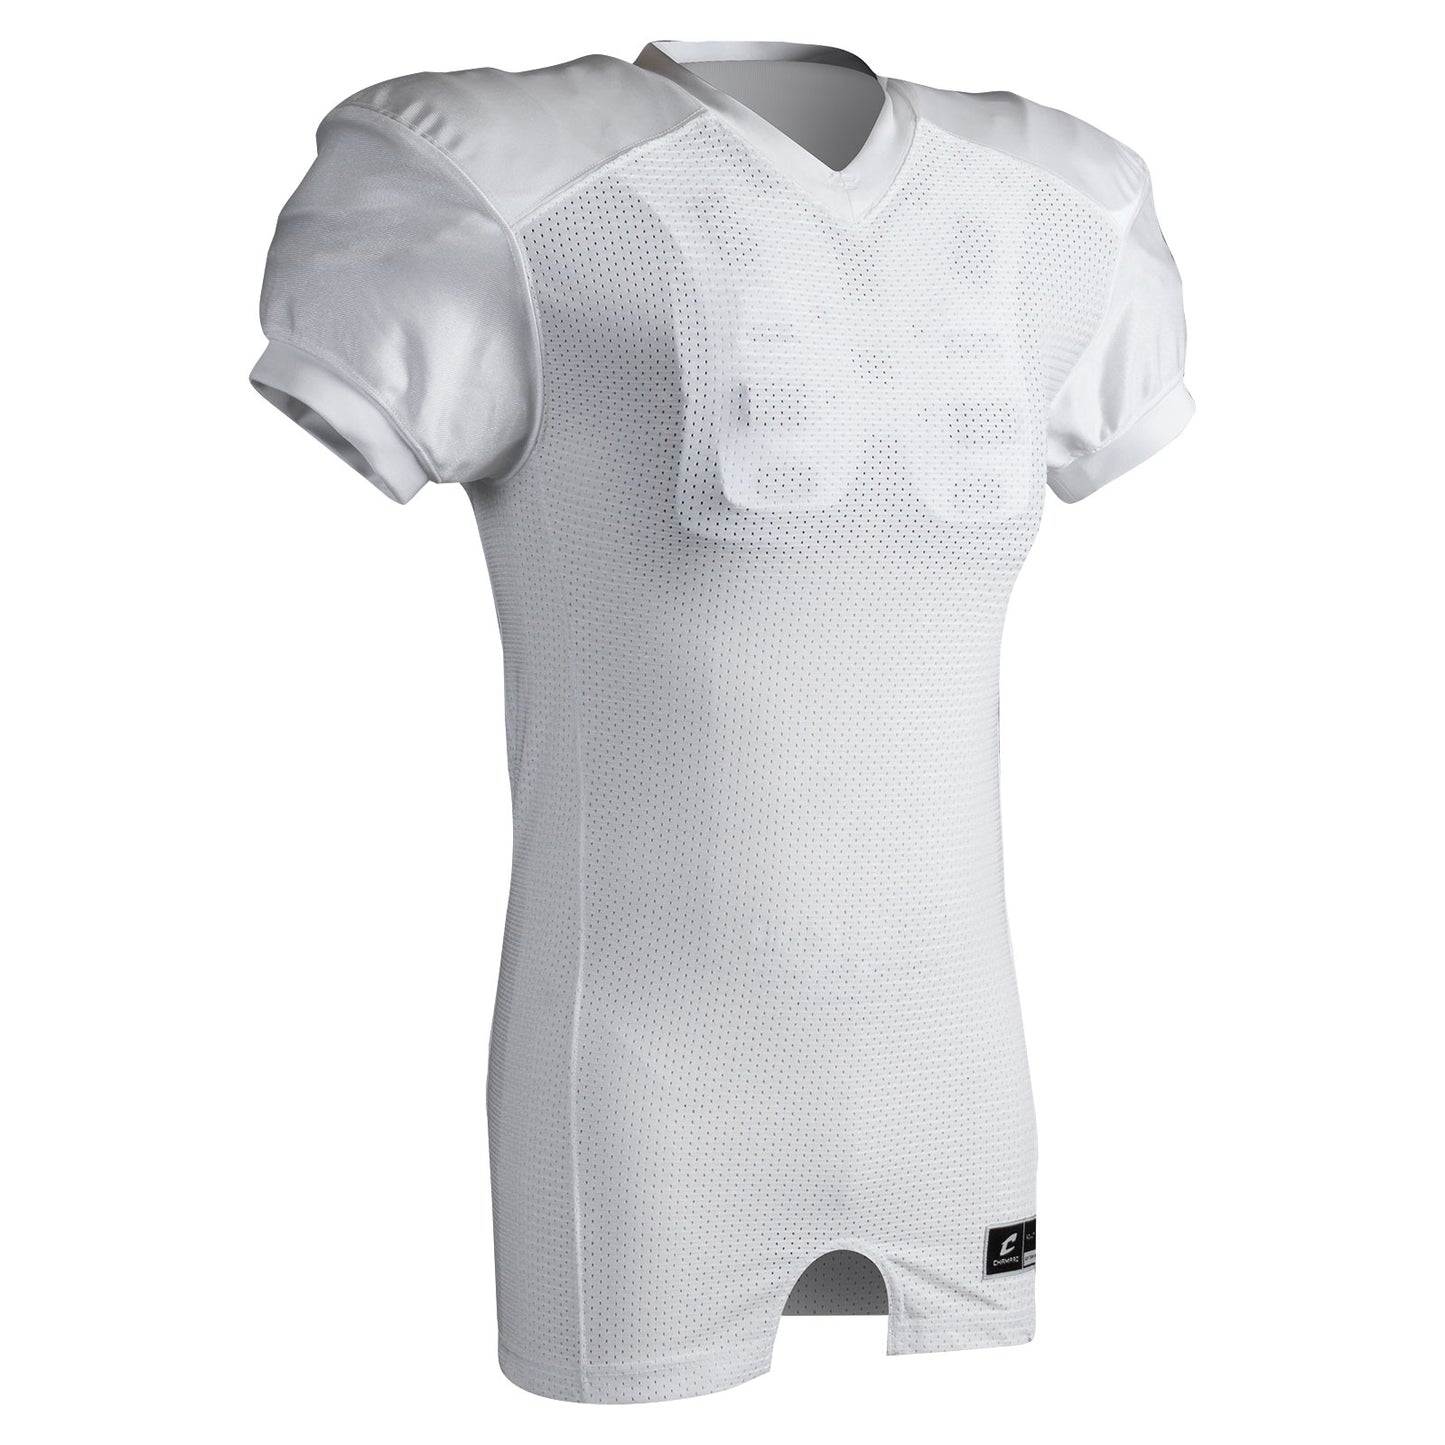 Pro-Fit Collegiate Fit Football Game Jersey WHITE BODY